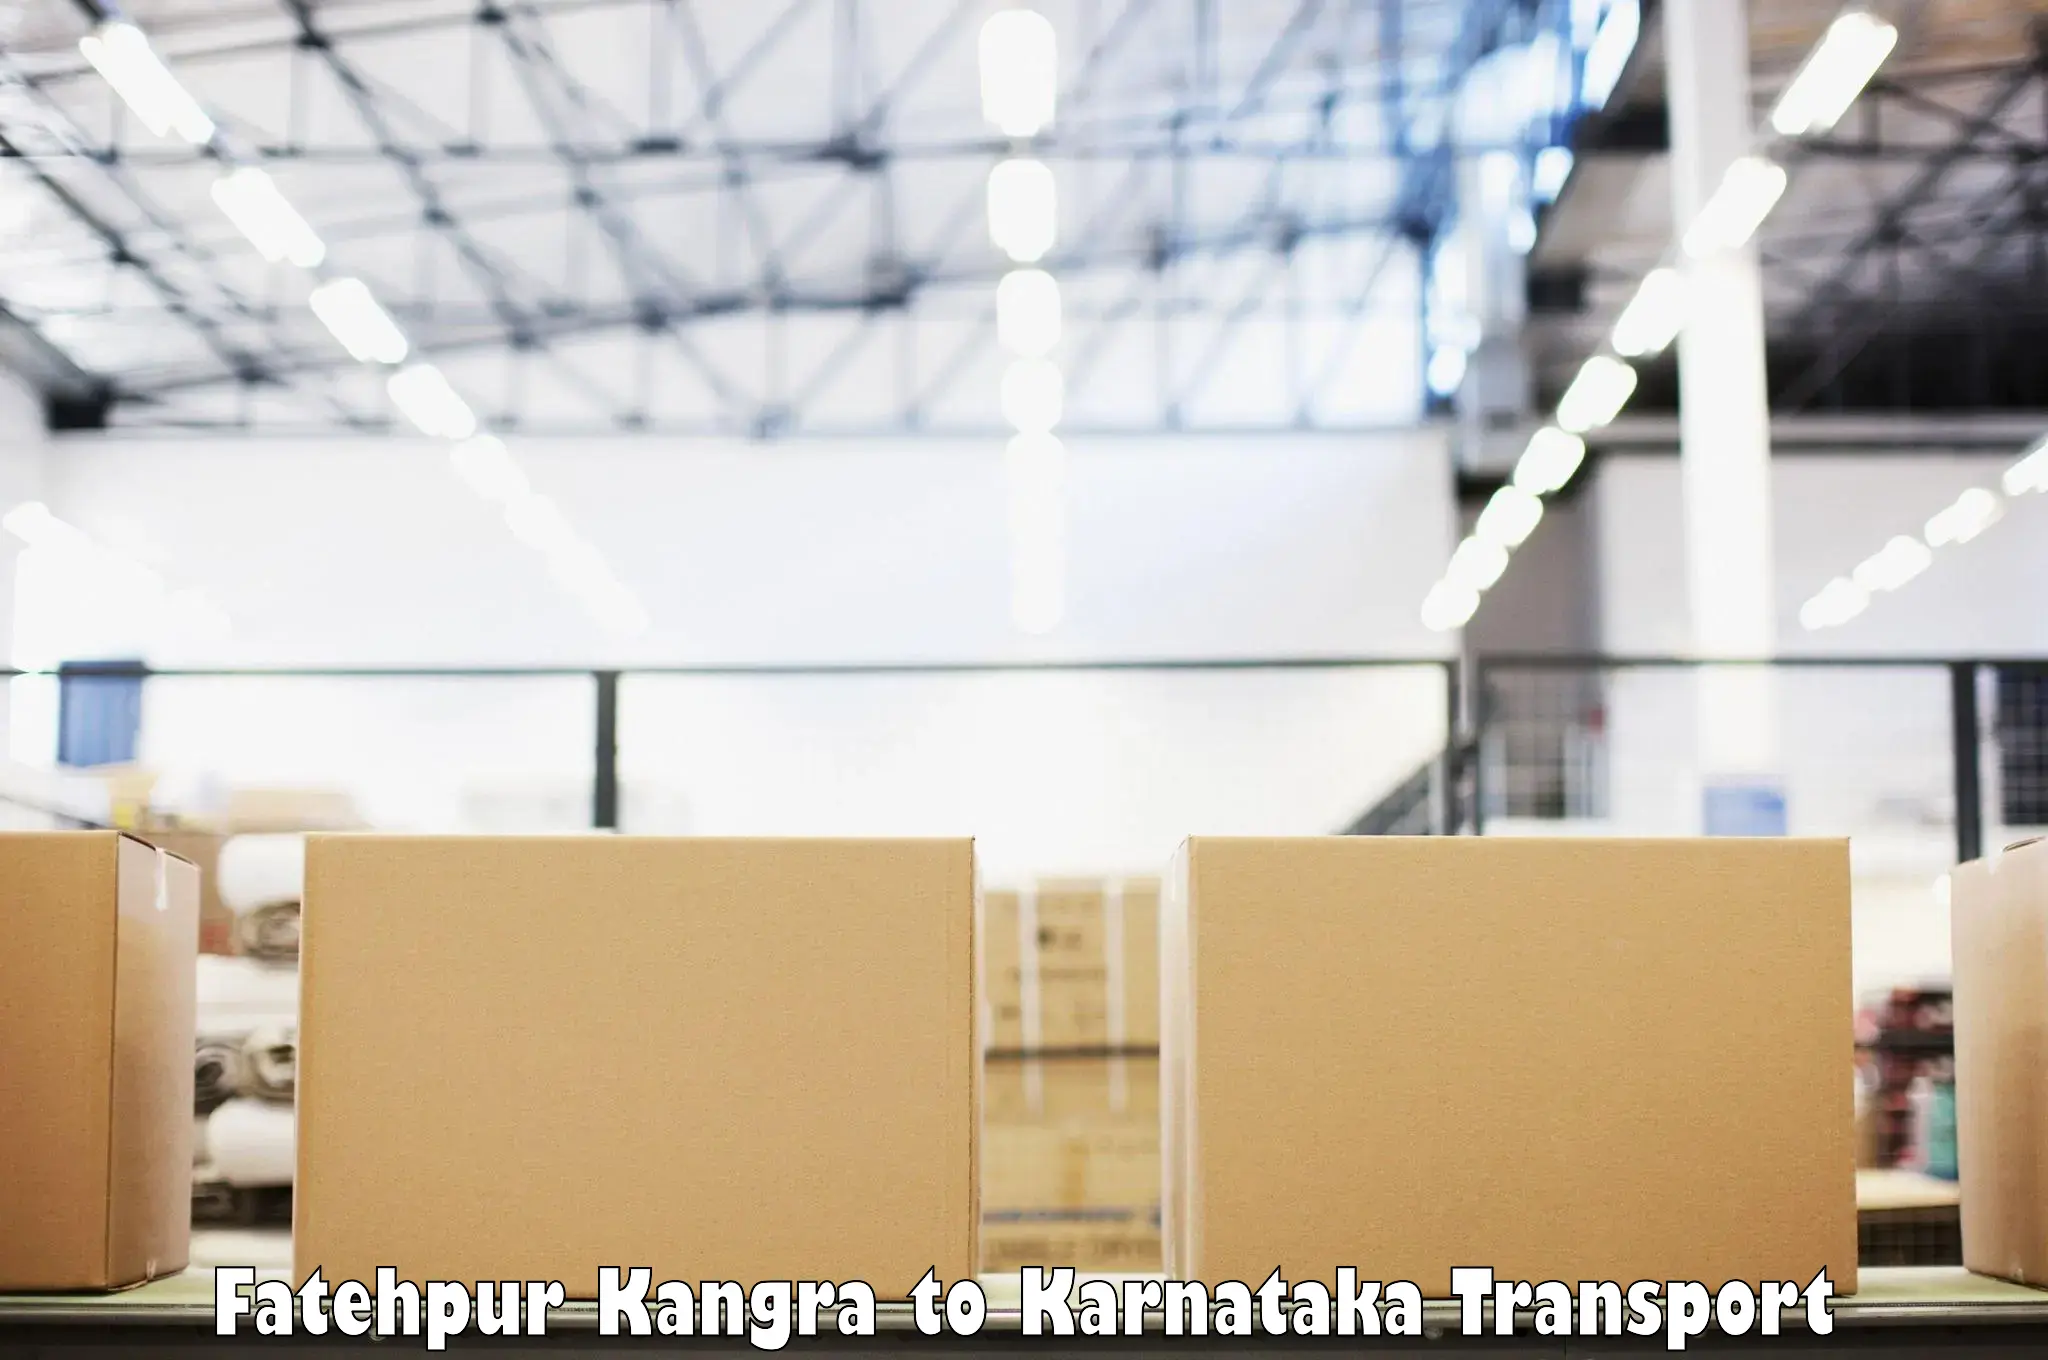 Container transportation services Fatehpur Kangra to Muddebihal